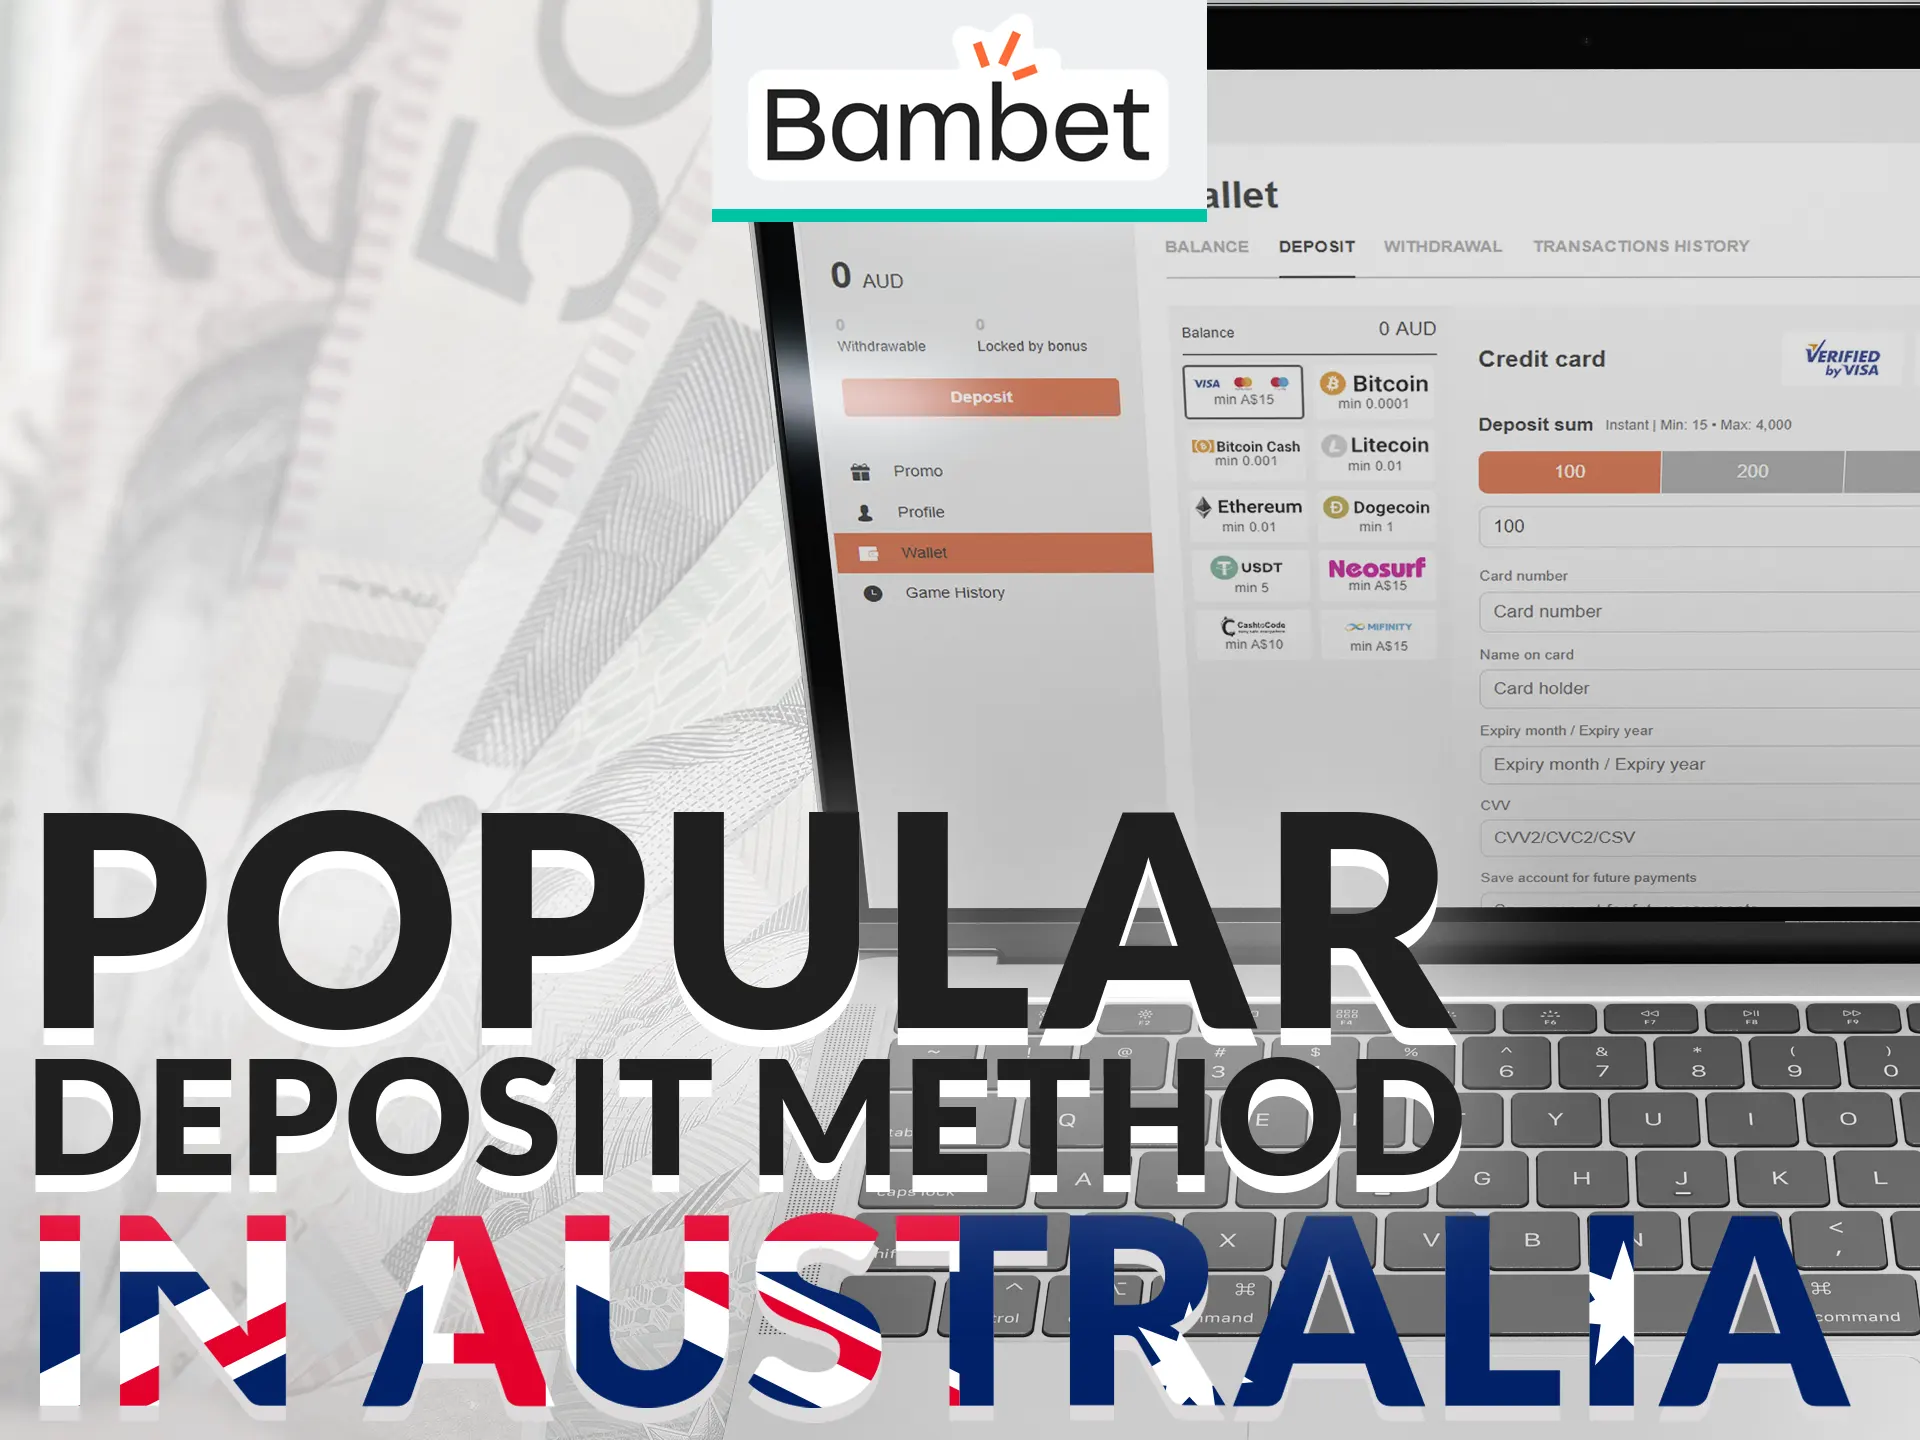 Popular deposit methods in Australia: credit/debit cards, wire transfers, ensuring convenience, security, and popularity.